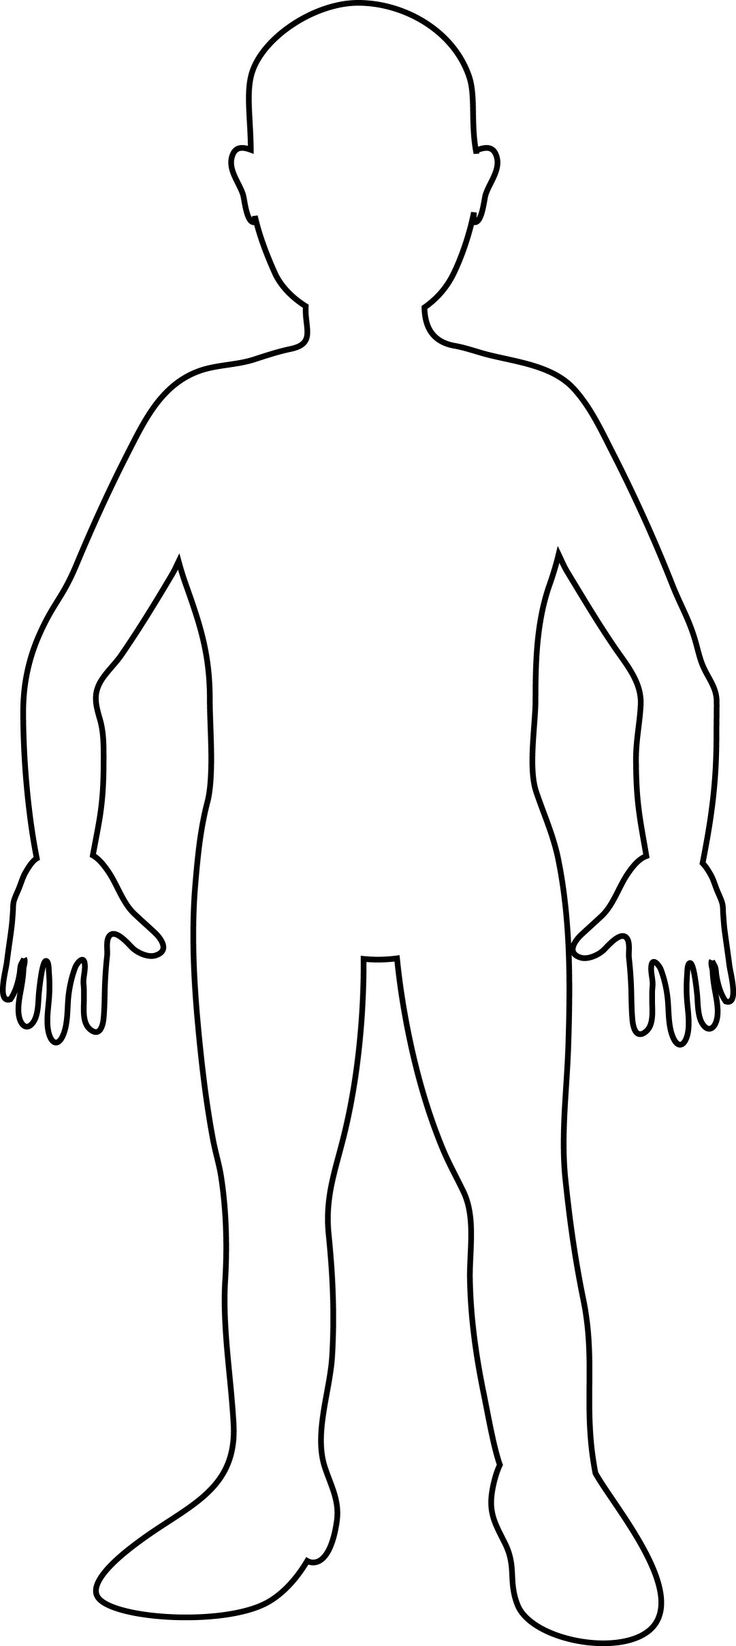 Free Outline Of A Body, Download Free Clip Art, Free Clip